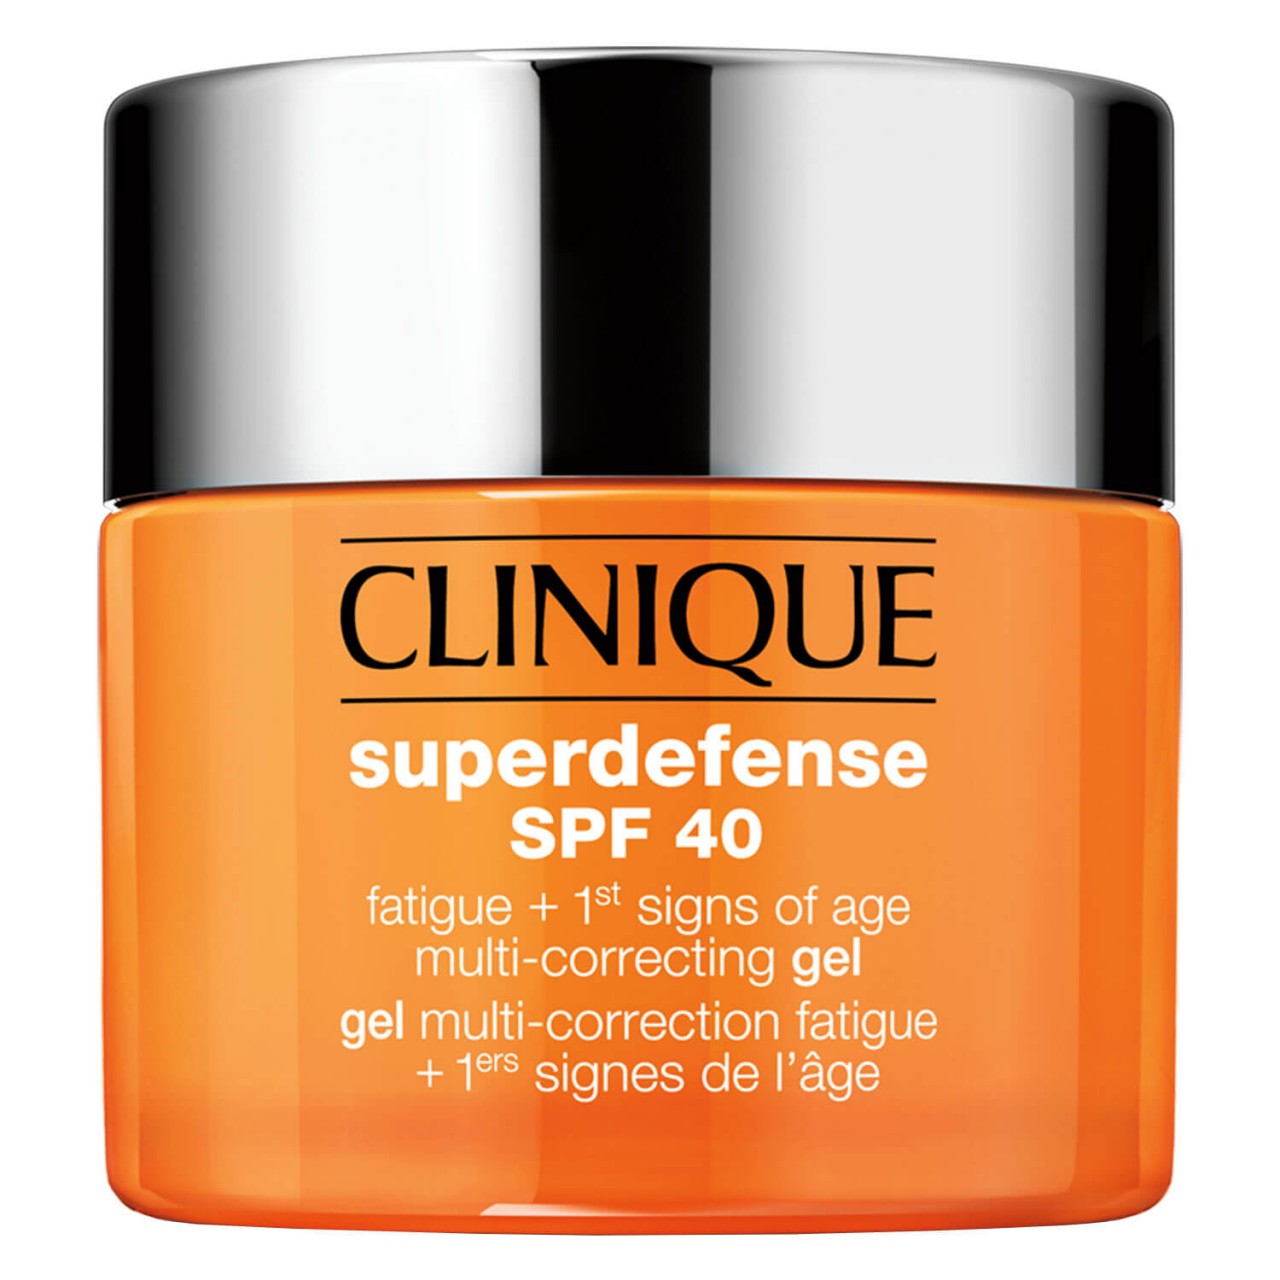 Clinique - Superdefense SPF40 Fatigue + 1st Signs of Age Multi Correcting Gel